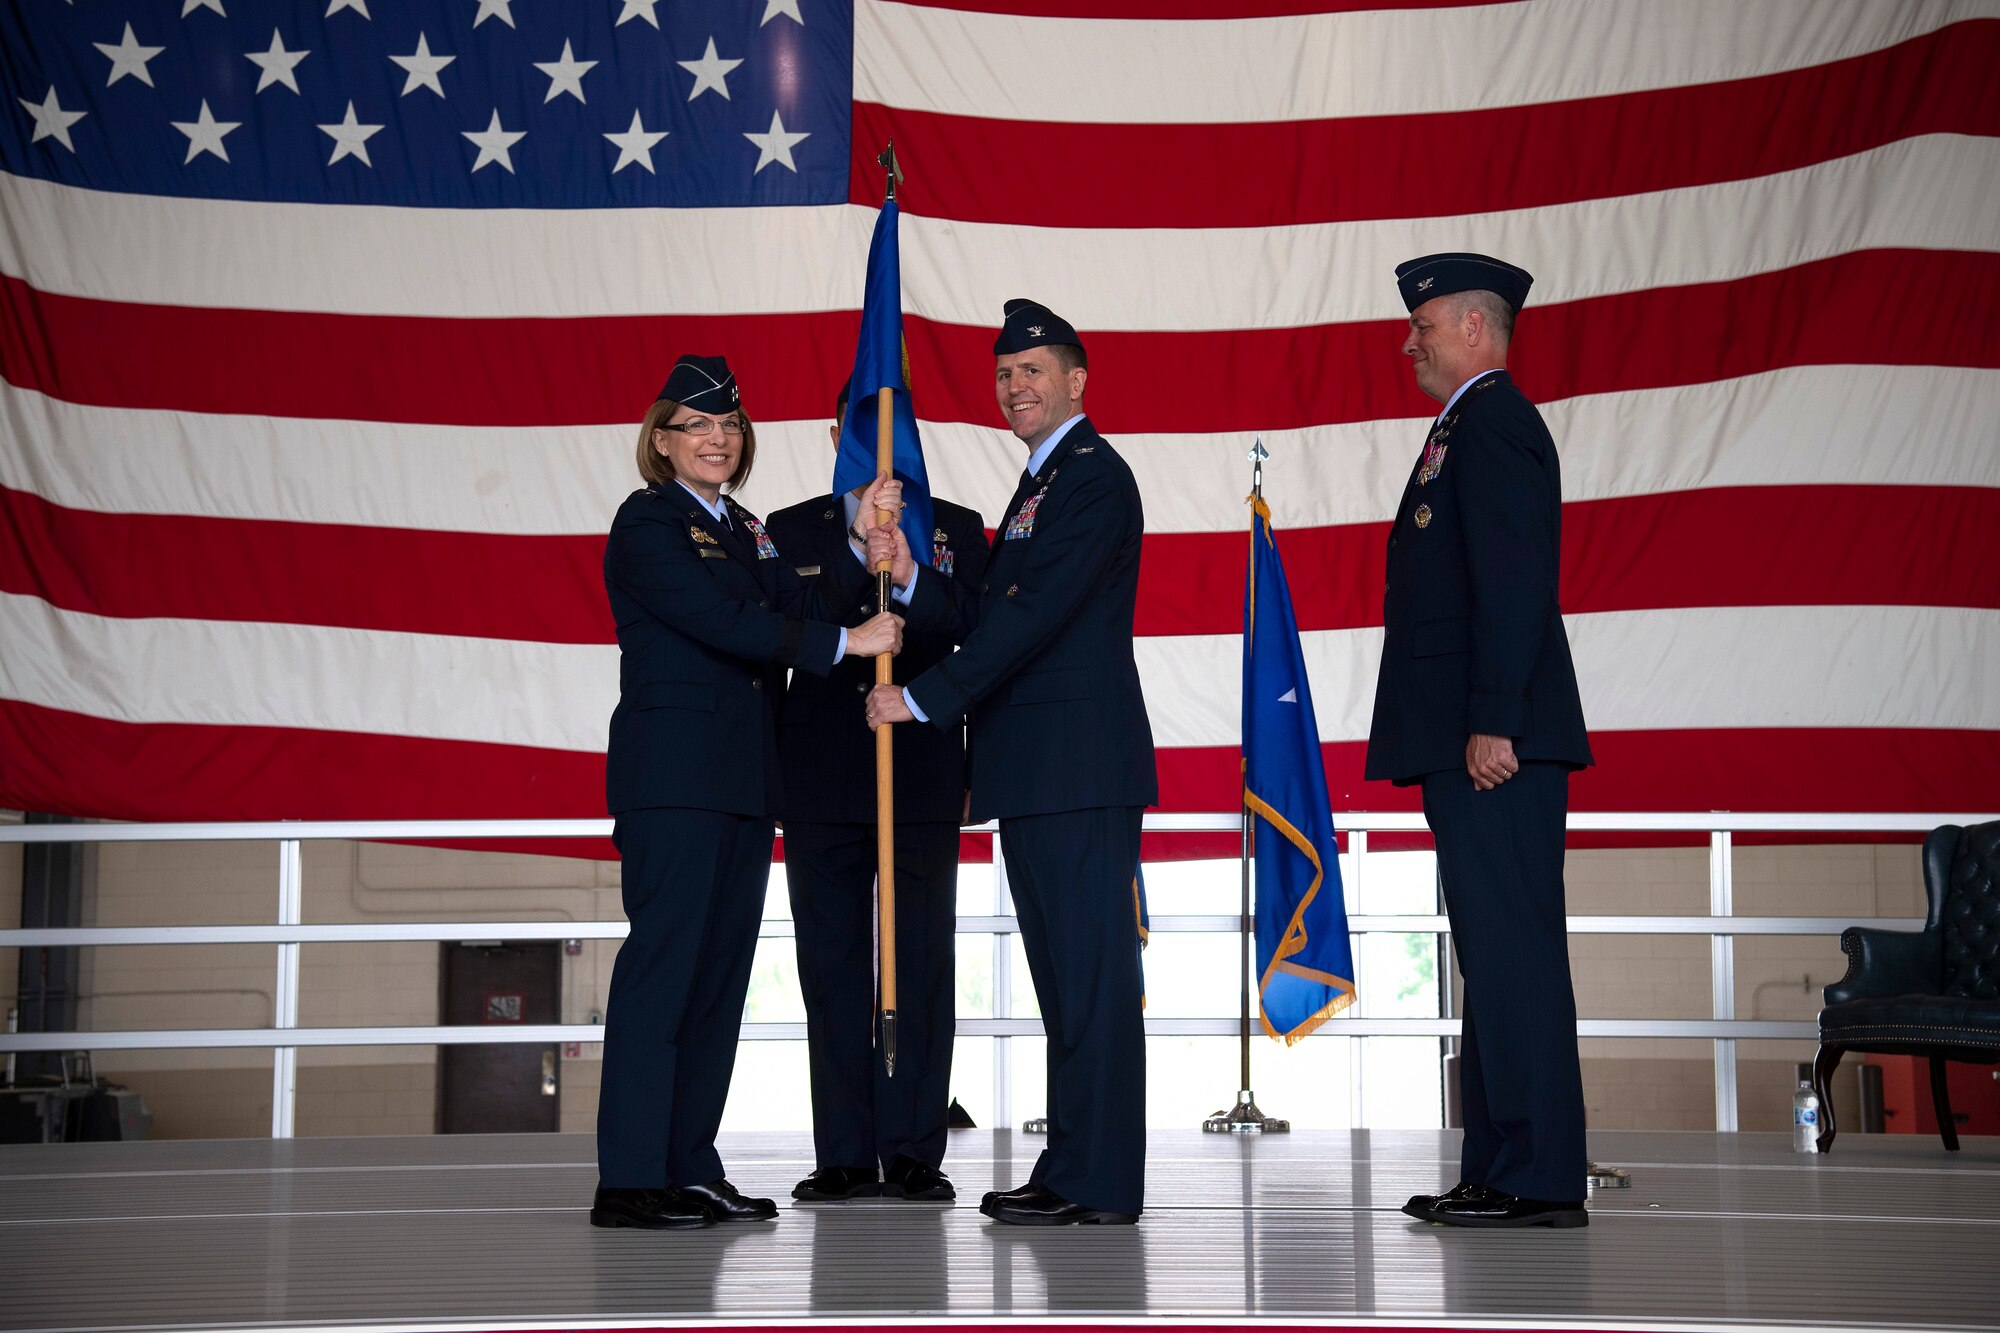 Col. Cameron Pringle, 319th Air Base Wing commander, assumes command in recieving the 319 ABW guidon from Maj. Gen. Mary O’Brian, 25th Air Force commander, during a change of command ceremony for the wing June 28, 2019, on Grand Forks Air Force Base, North Dakota.